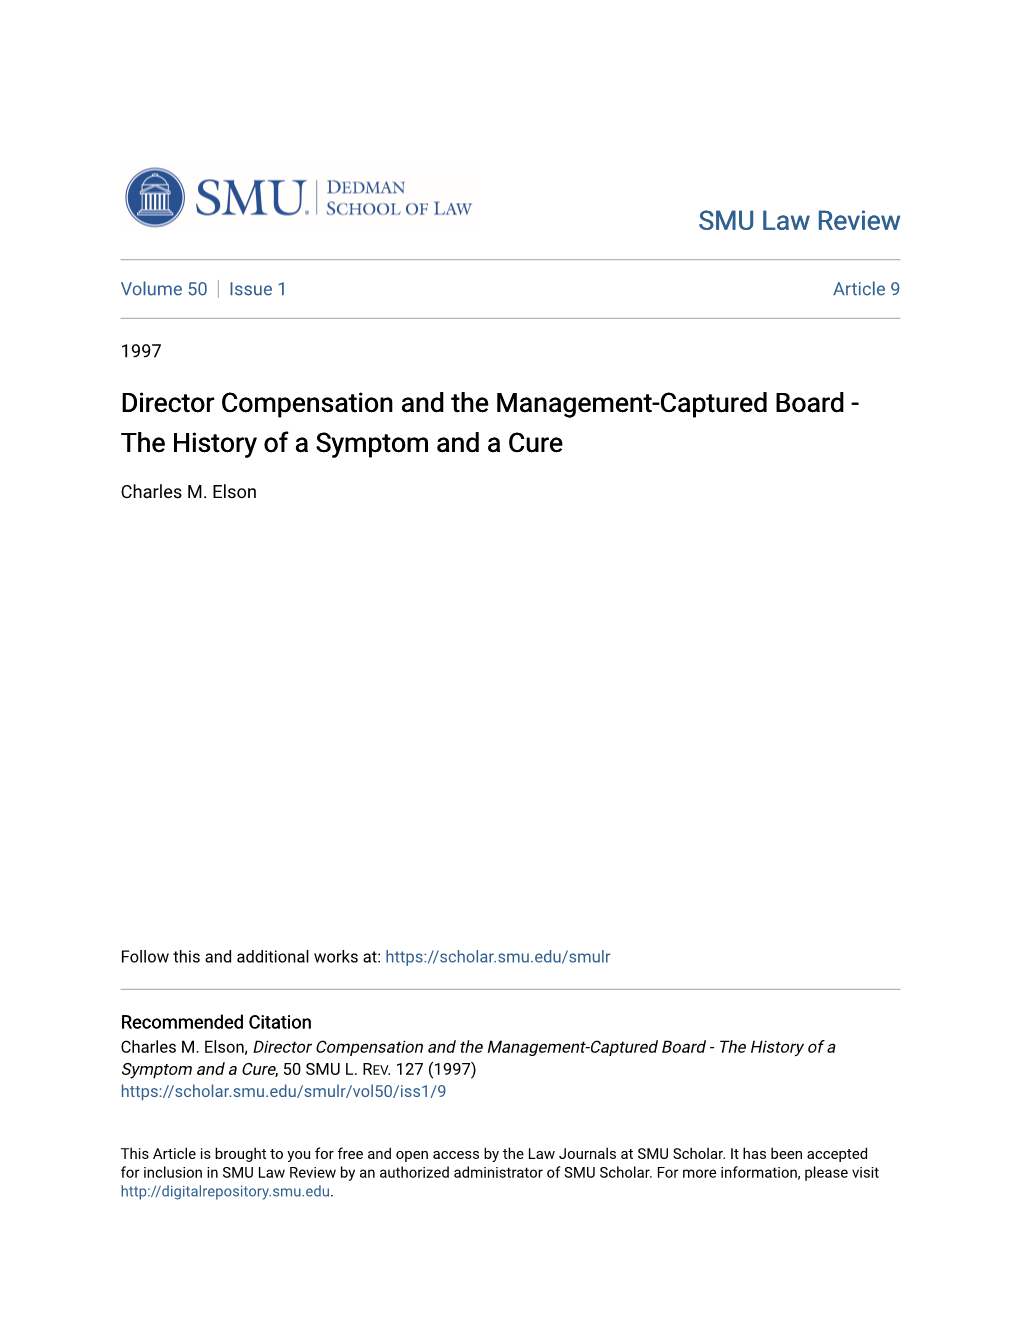 Director Compensation and the Management-Captured Board - the History of a Symptom and a Cure